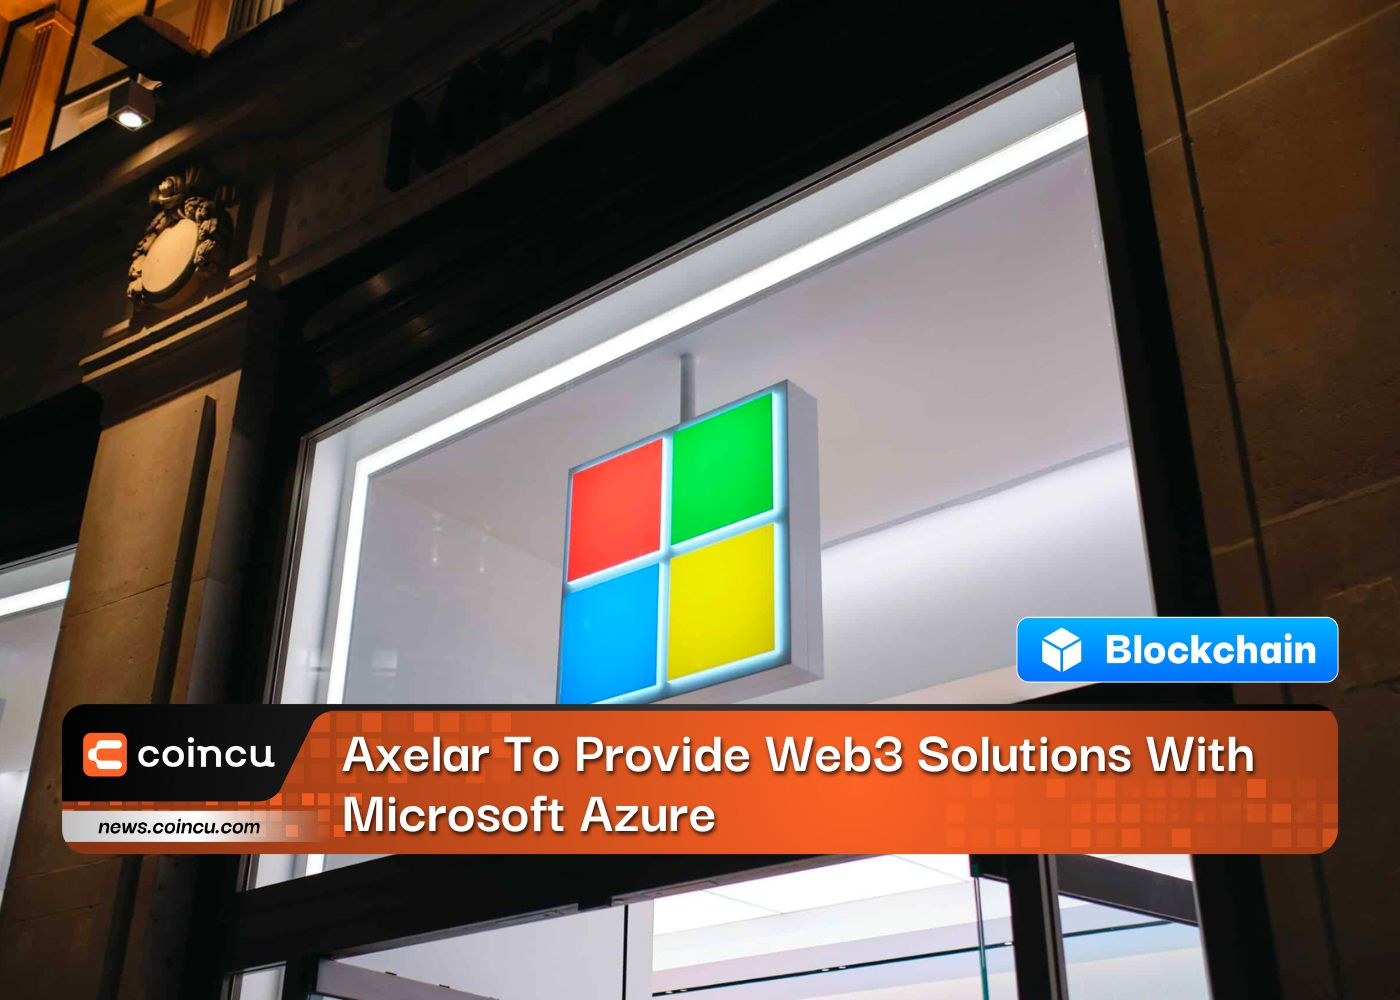 Axelar To Provide Web3 Solutions With Microsoft Azure